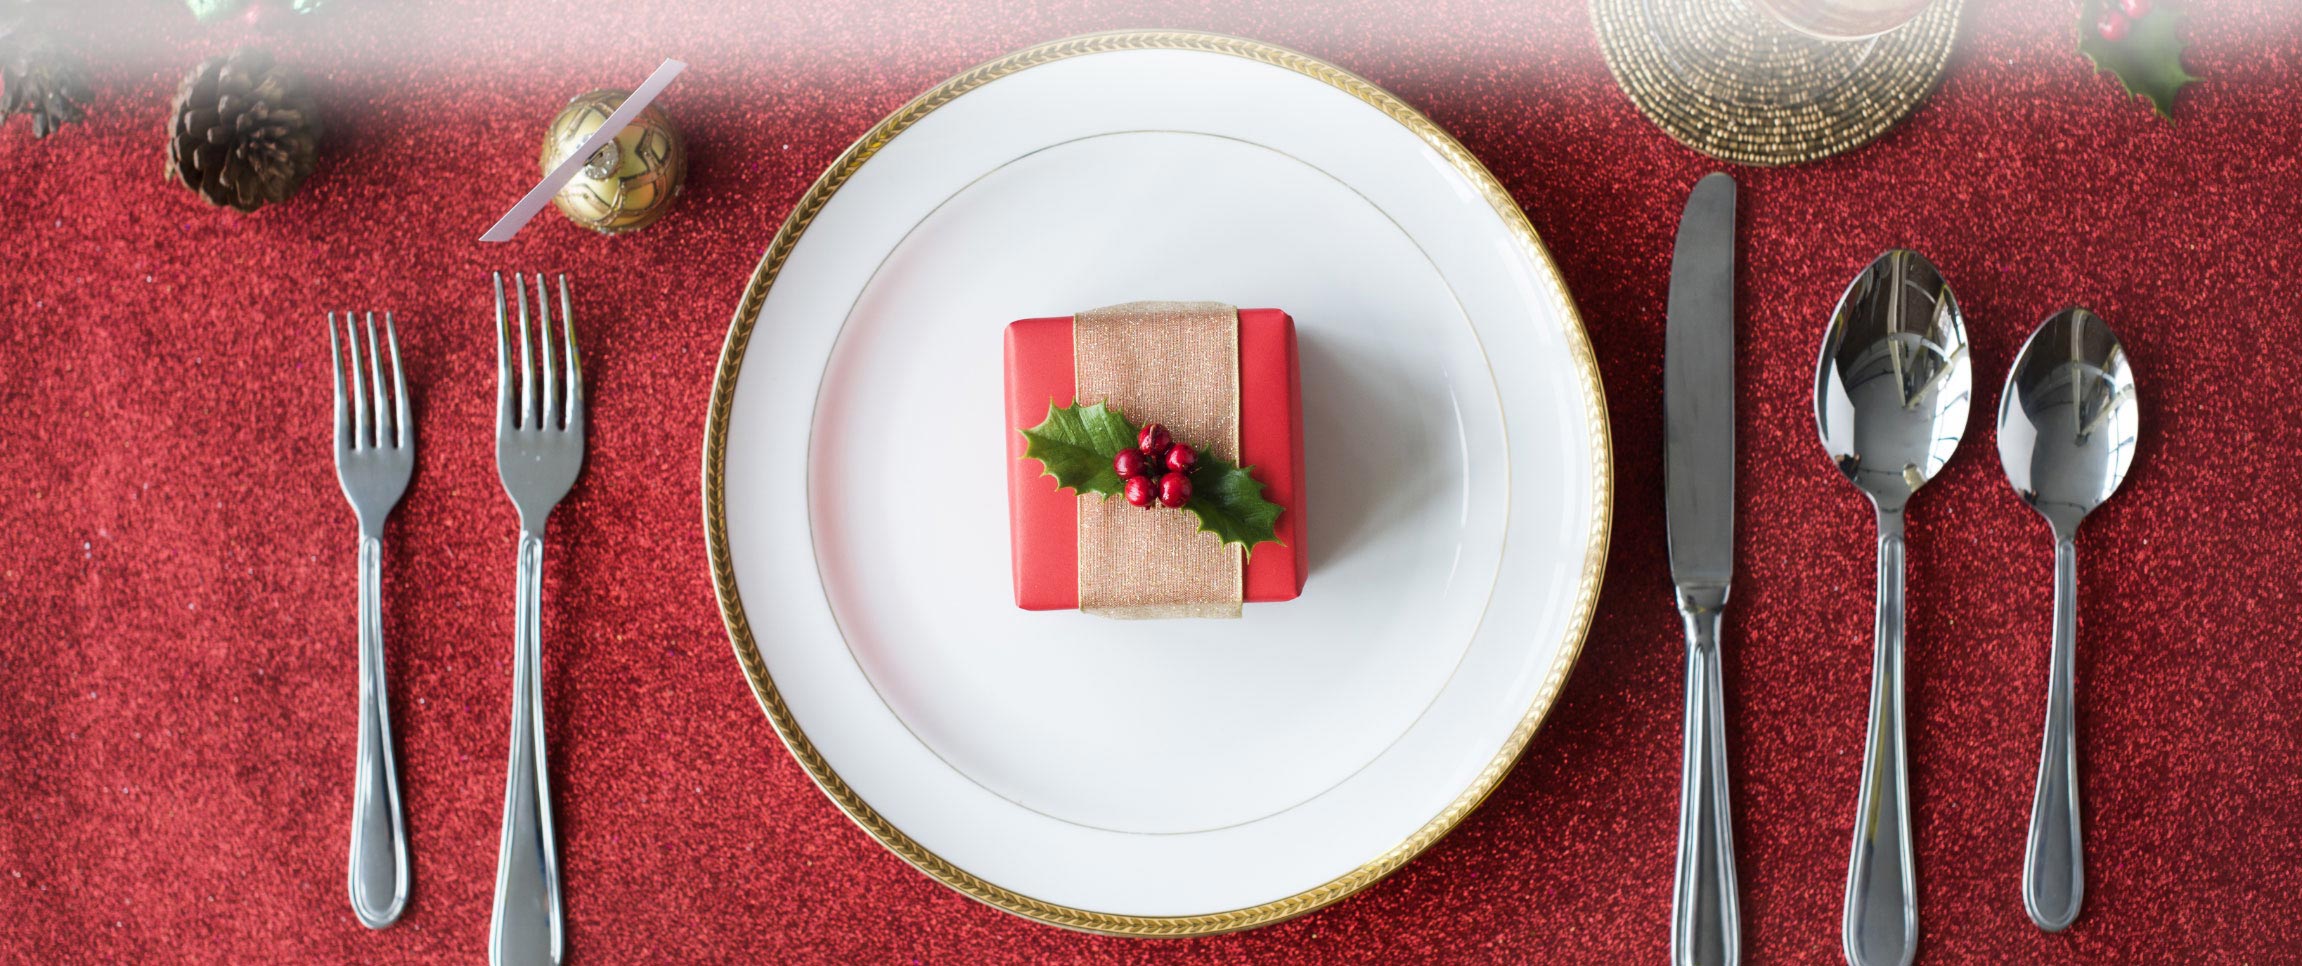 Preparing Your Restaurant for the Holidays